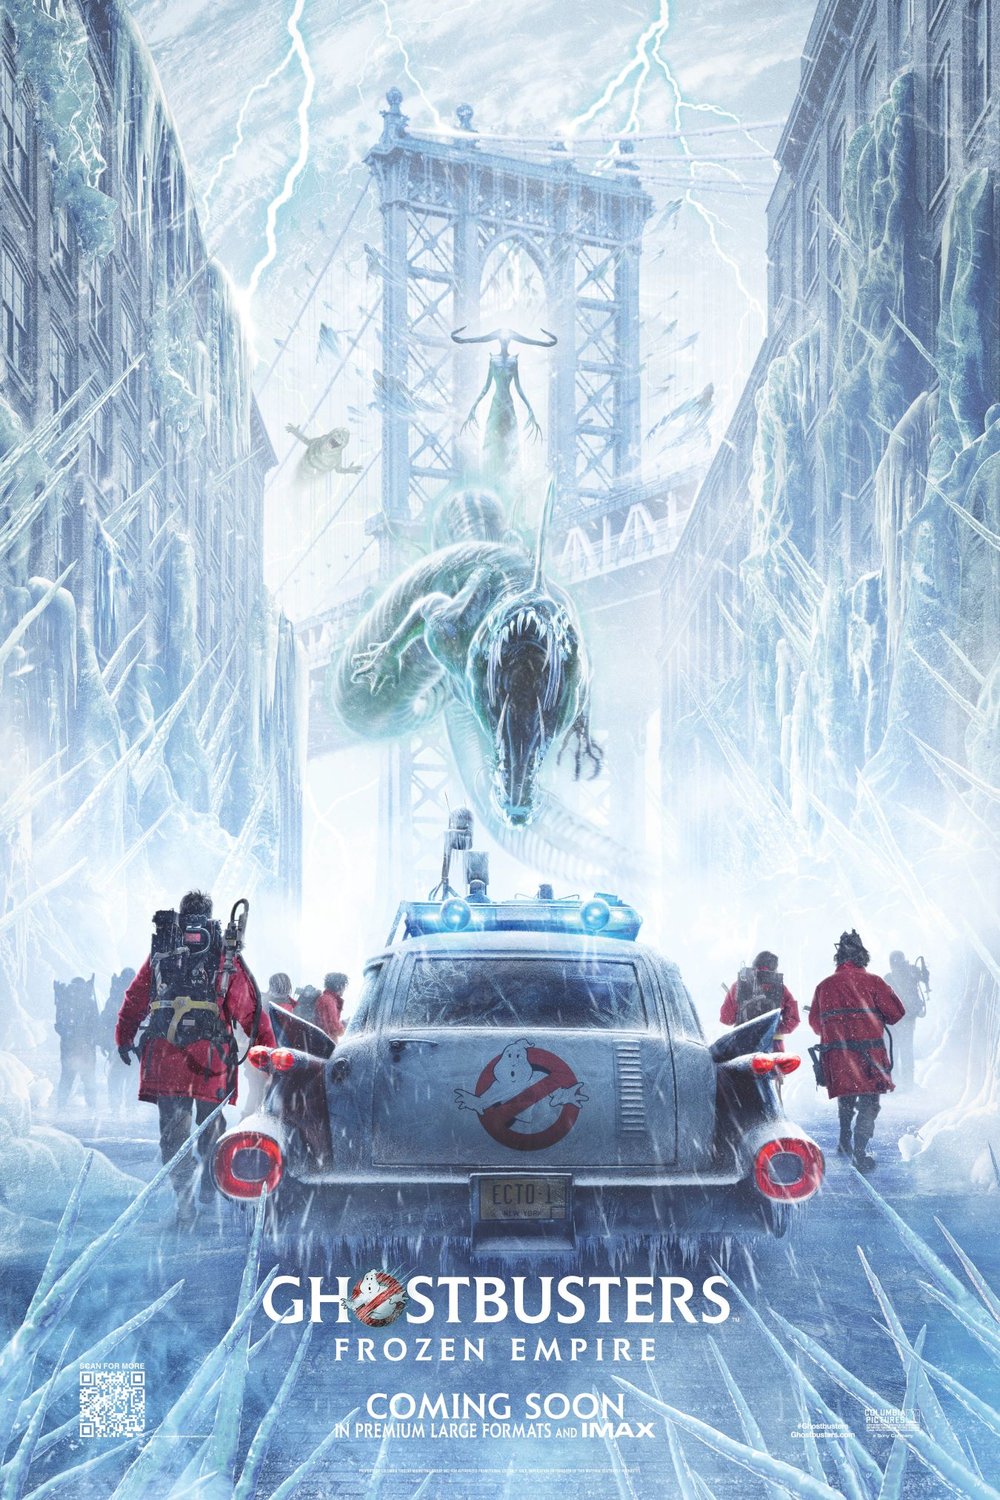 Poster of the movie Ghostbusters: Frozen Empire